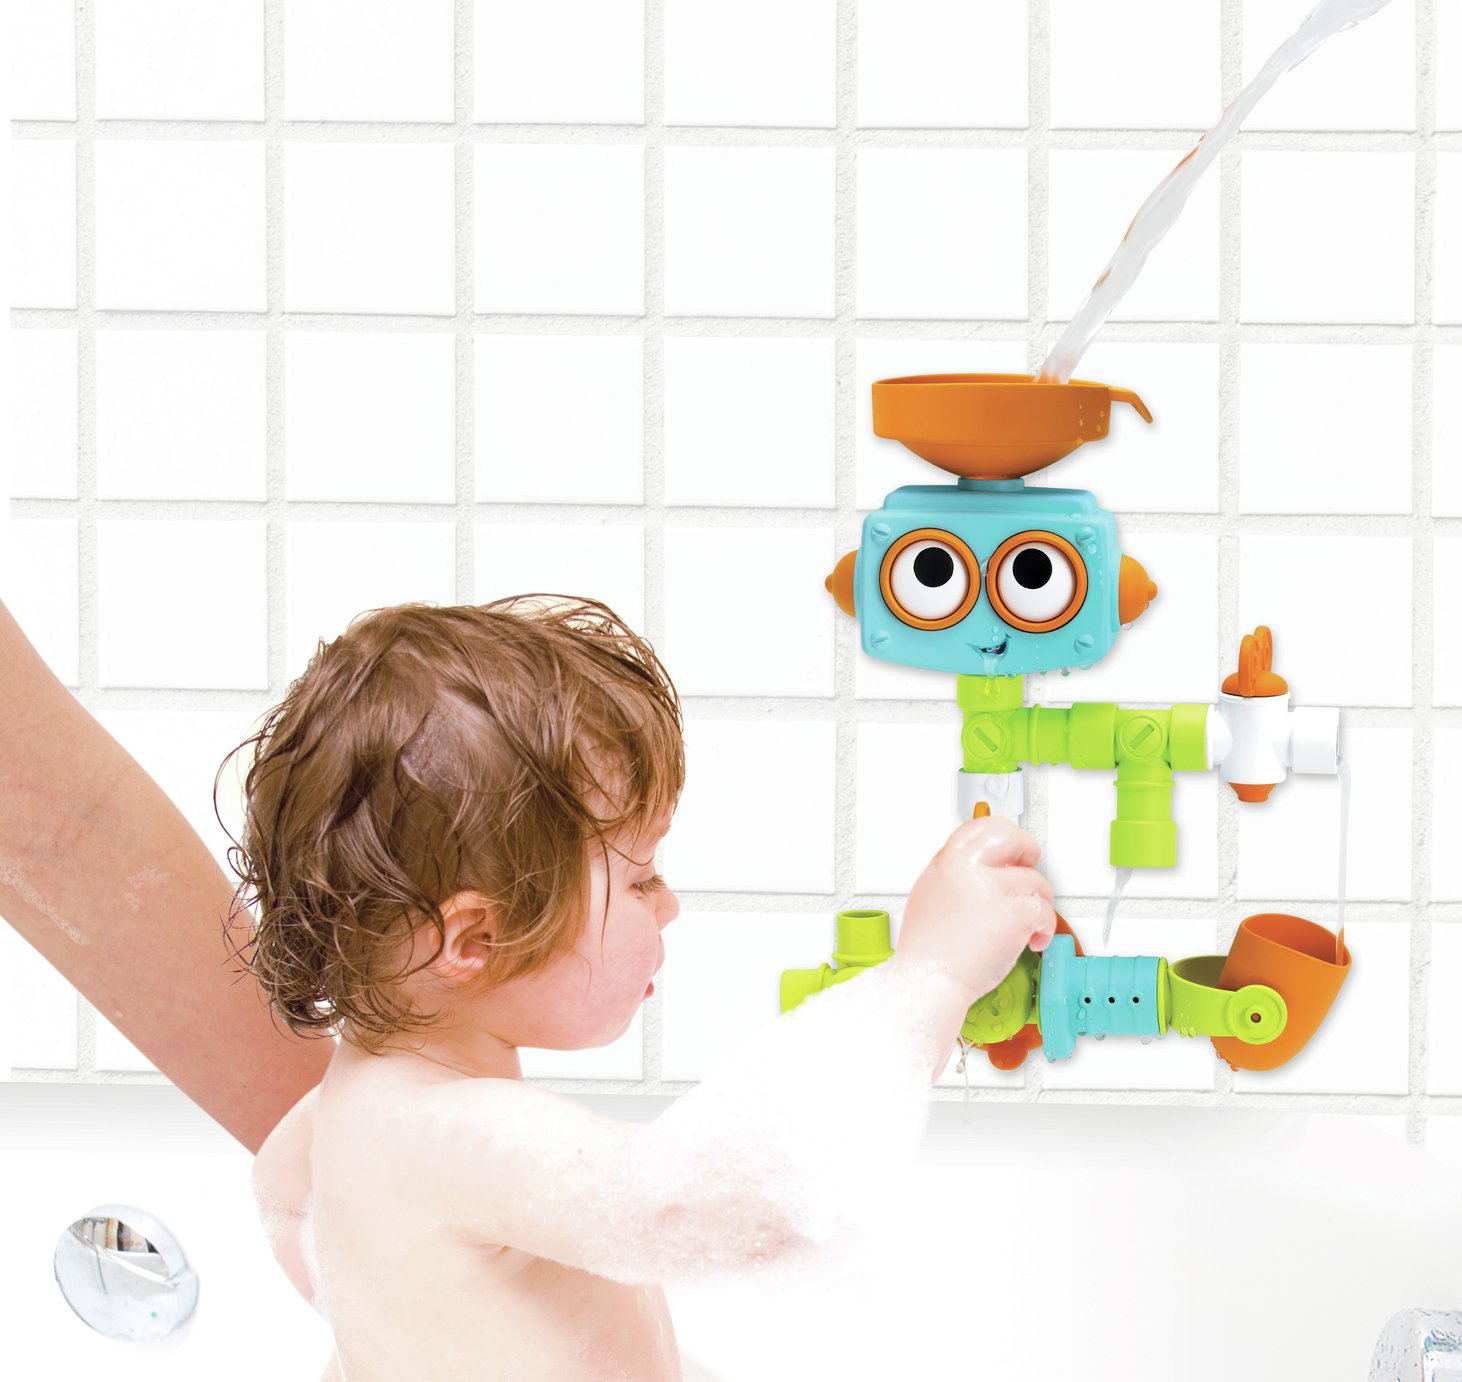 Infantino Build your own Bath Robot Review